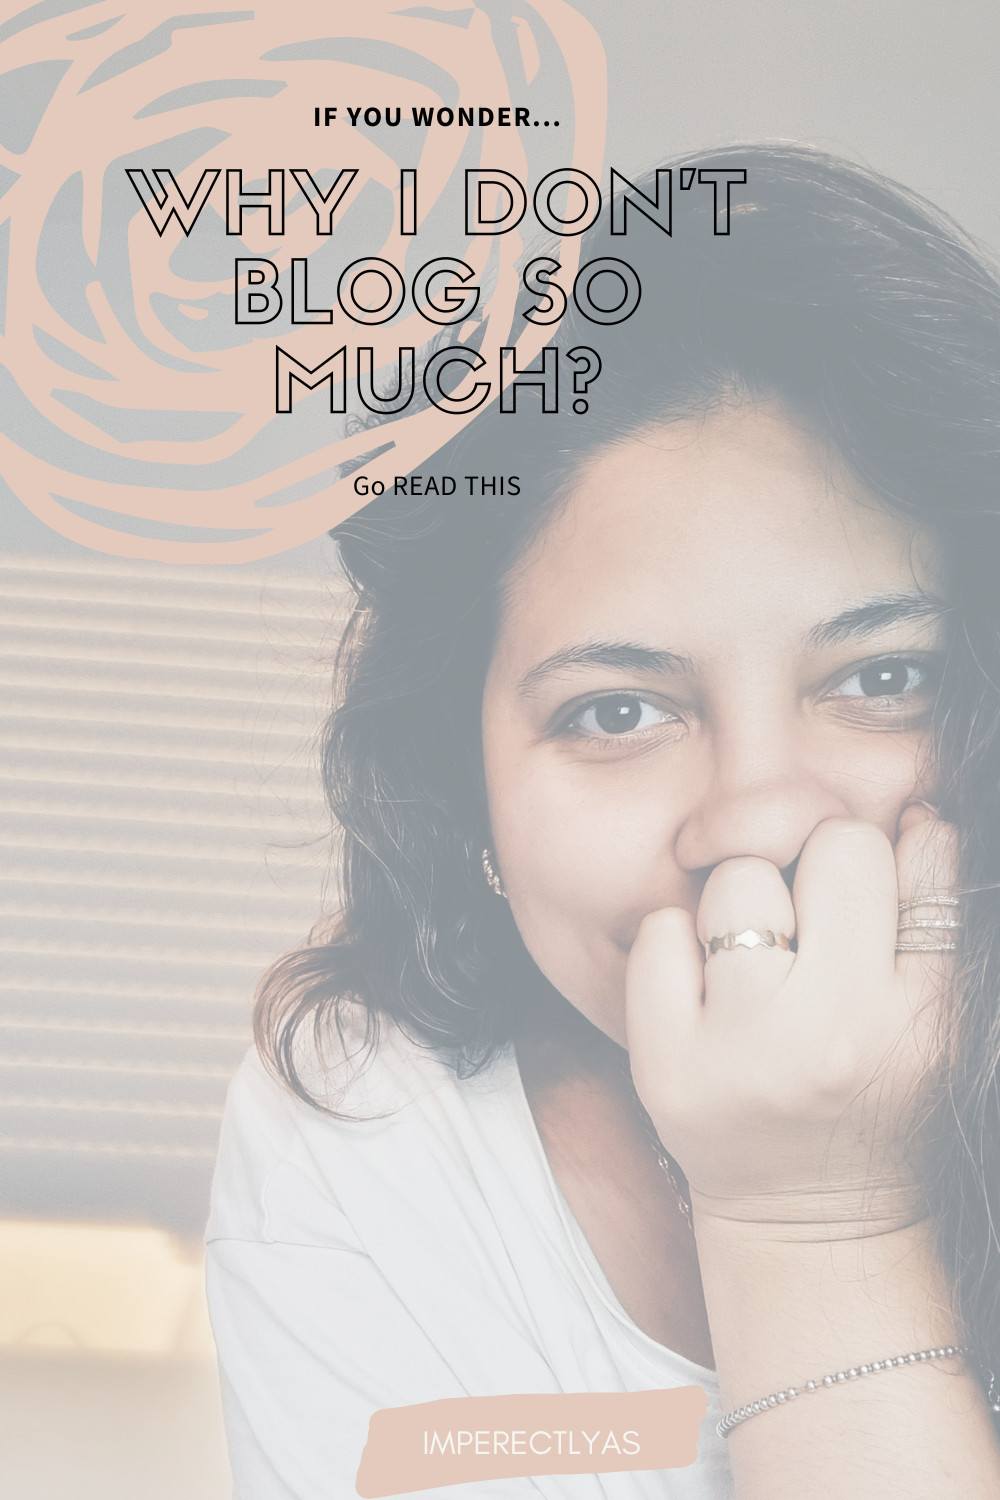 WHY I DON’T BLOG SO MUCH?